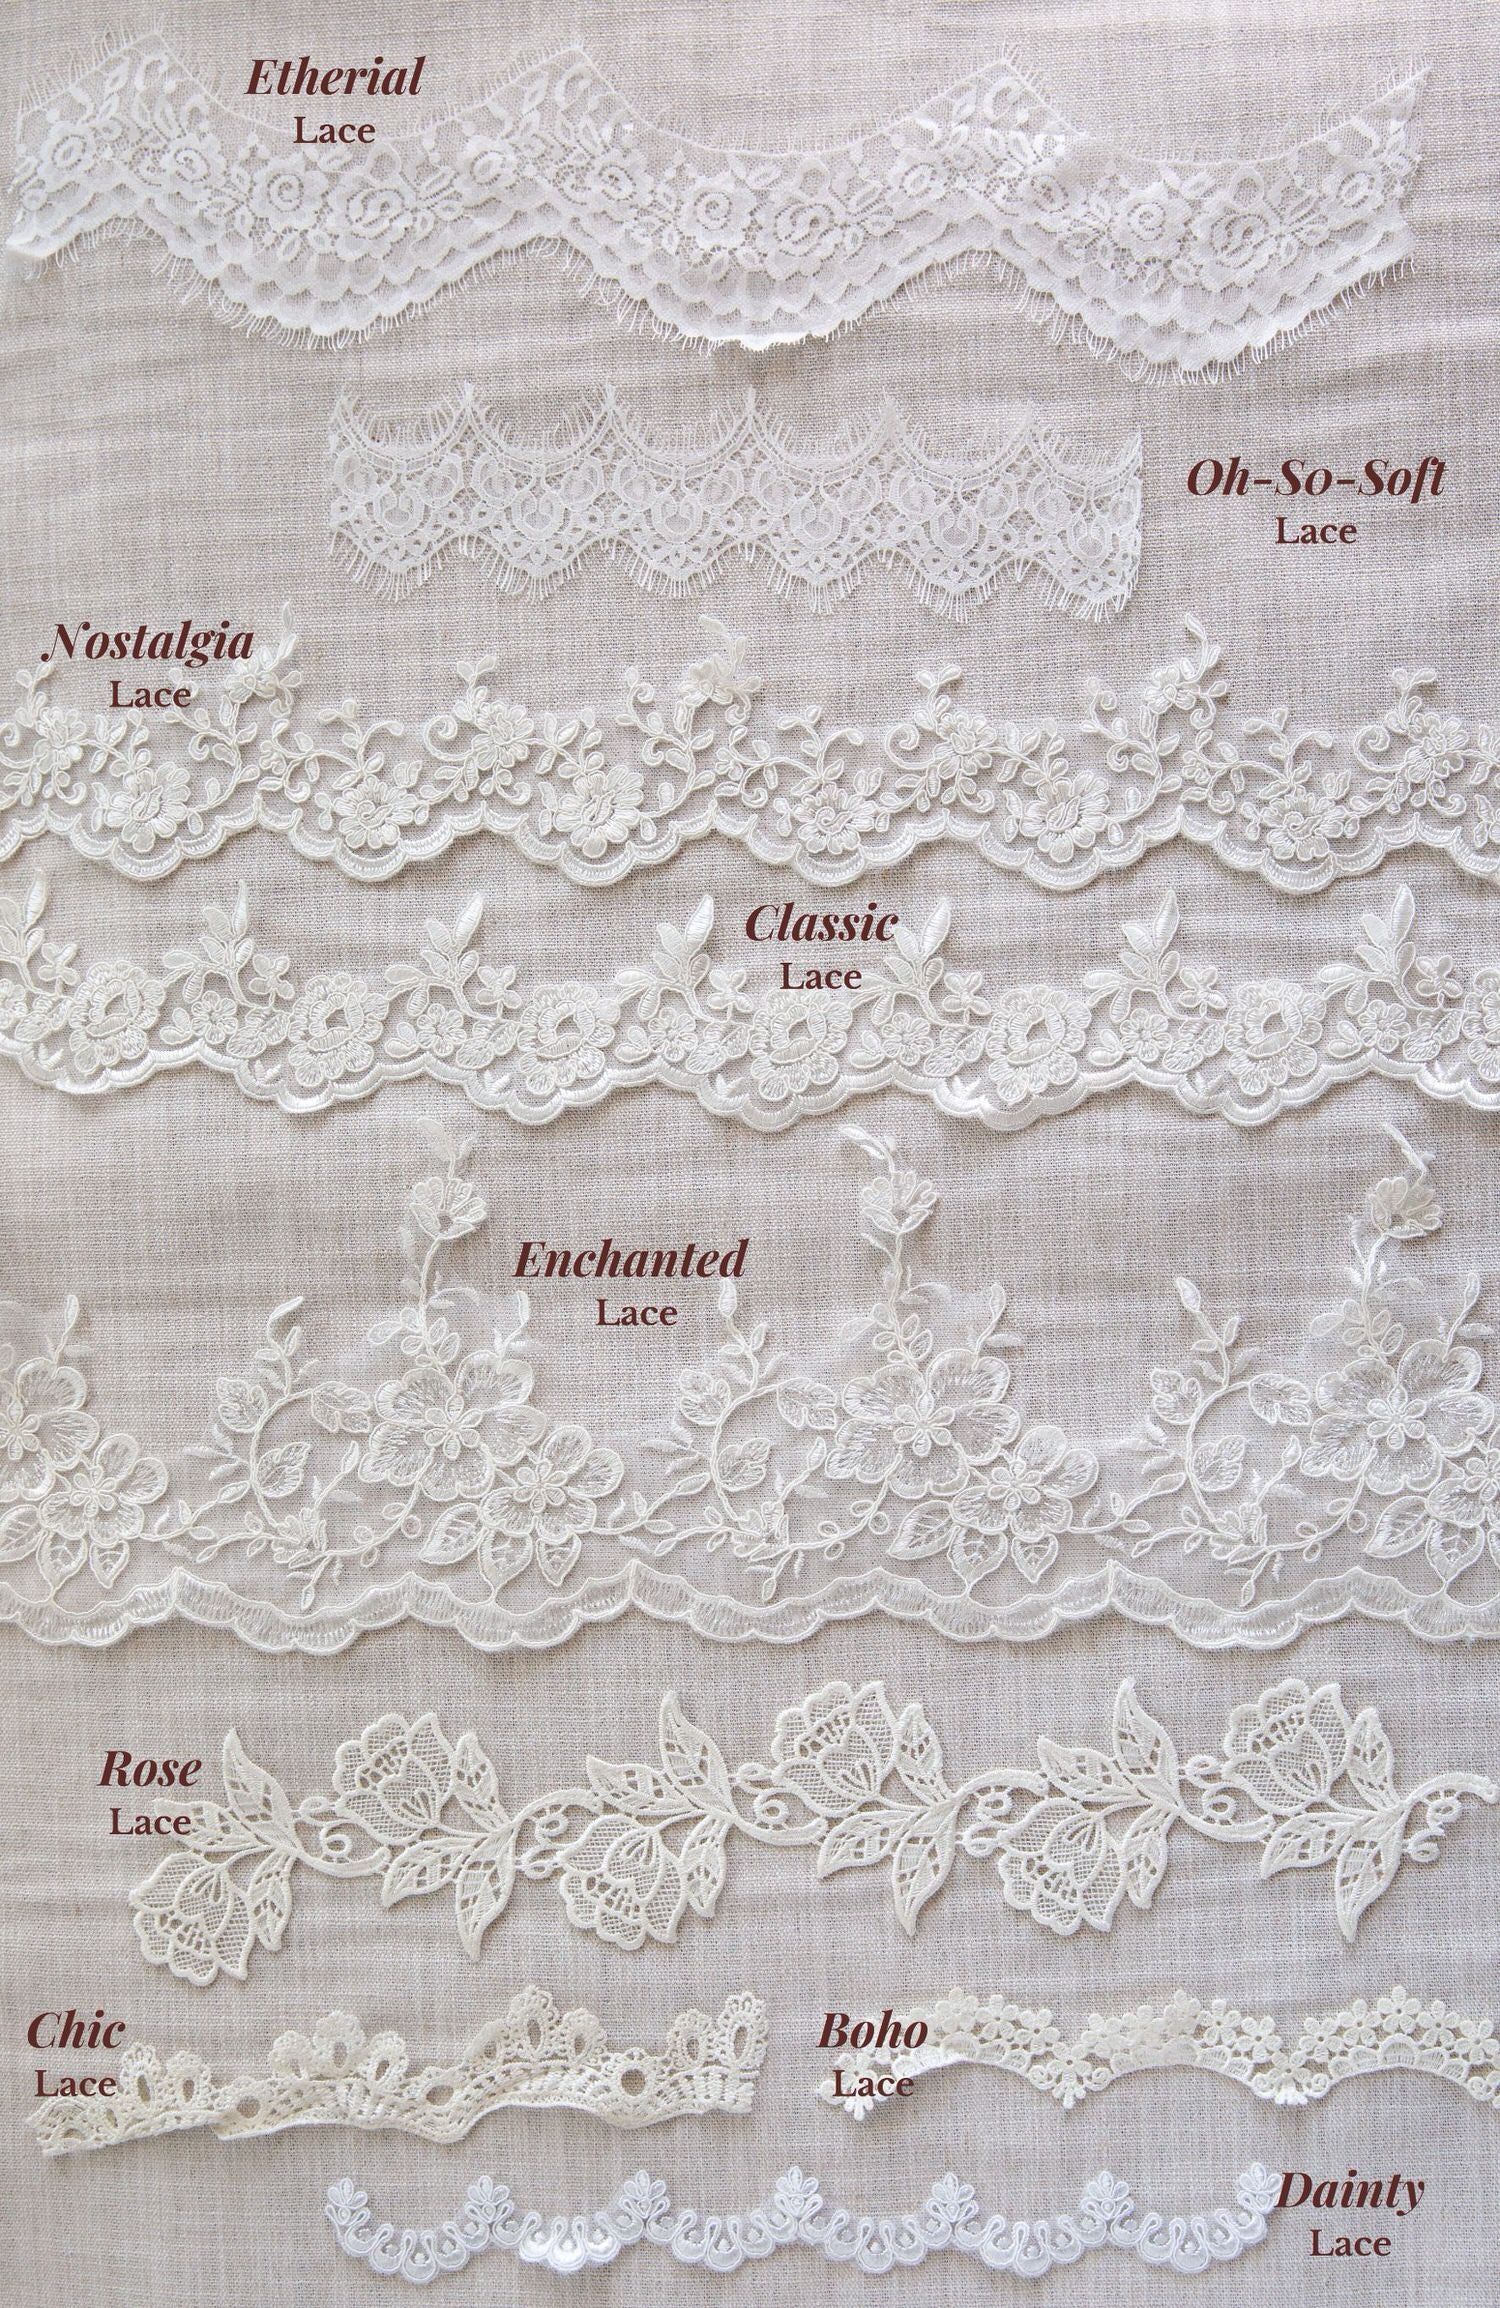 lace trim and edging options for custom bridal veils